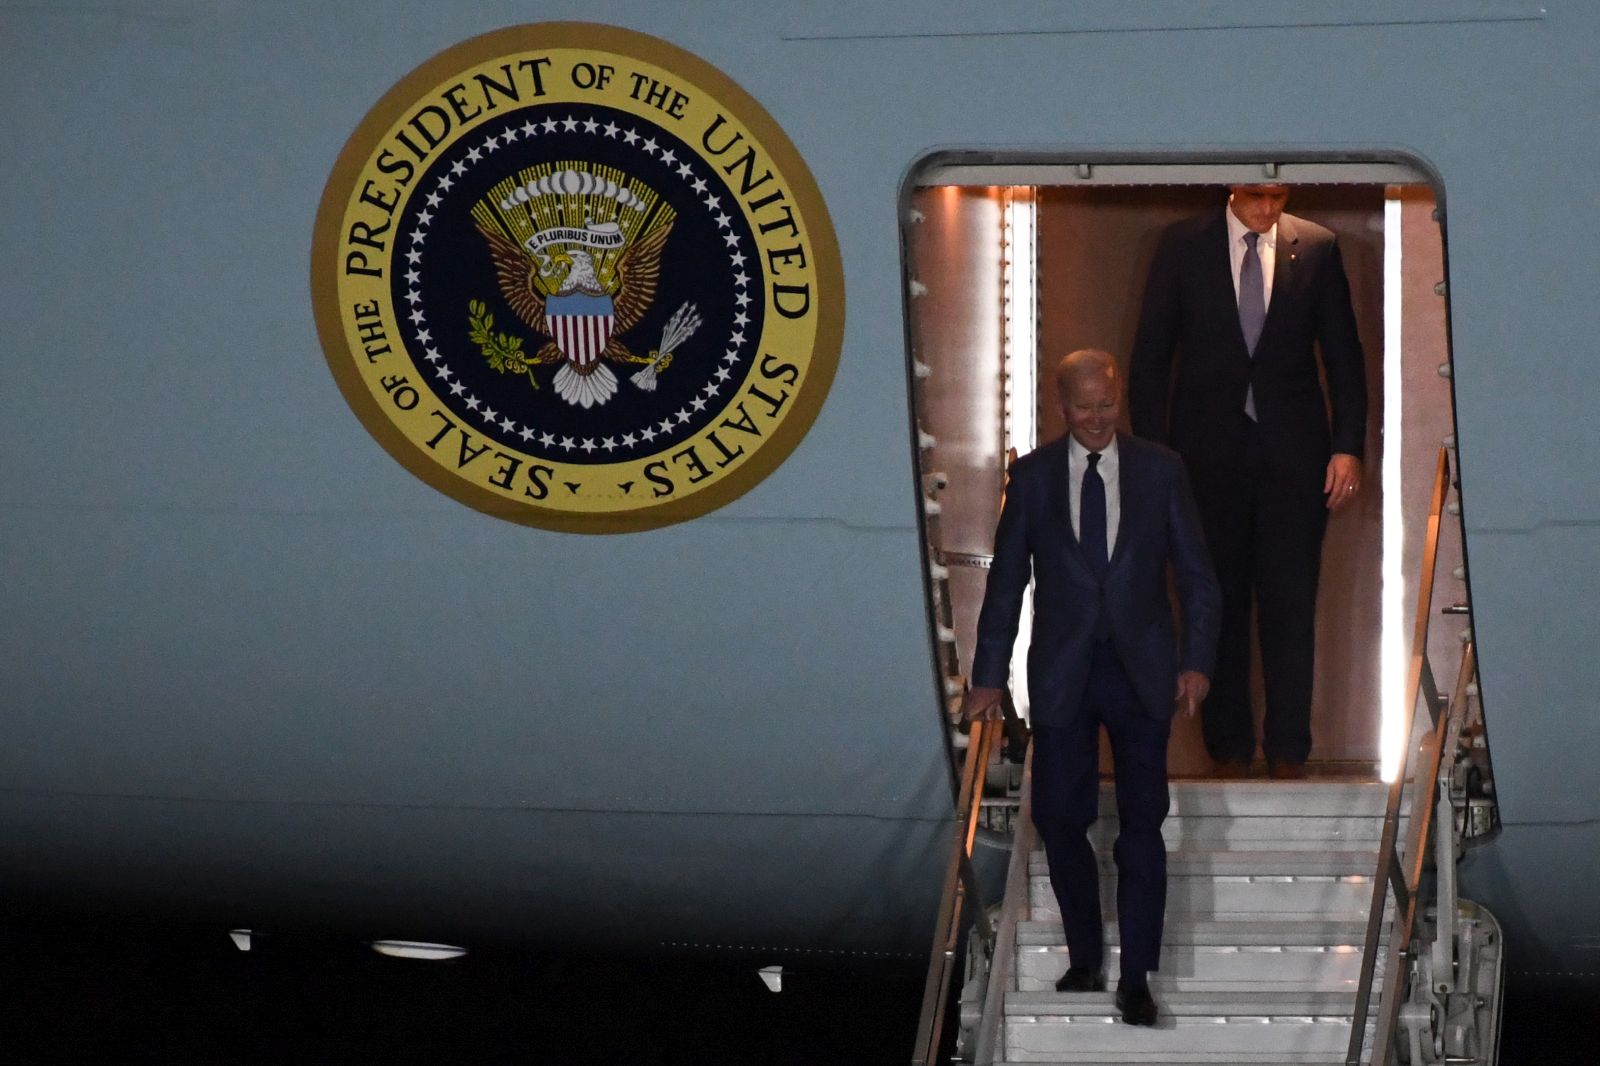 epa10568938 US President Joe Biden (C) disembarks the 'Air Force One' as he arrives at Aldergrove airport in Crumlin, Northern Ireland, Britain, 11 April 2023. Biden will mark the 25th anniversary of the Good Friday Agreement, which largely brought about an end to decades of sectarian violence in Northern Ireland, and celebrate the recent Brexit deal intended to preserve that pact.  EPA/Chris J. Ratcliffe / POOL